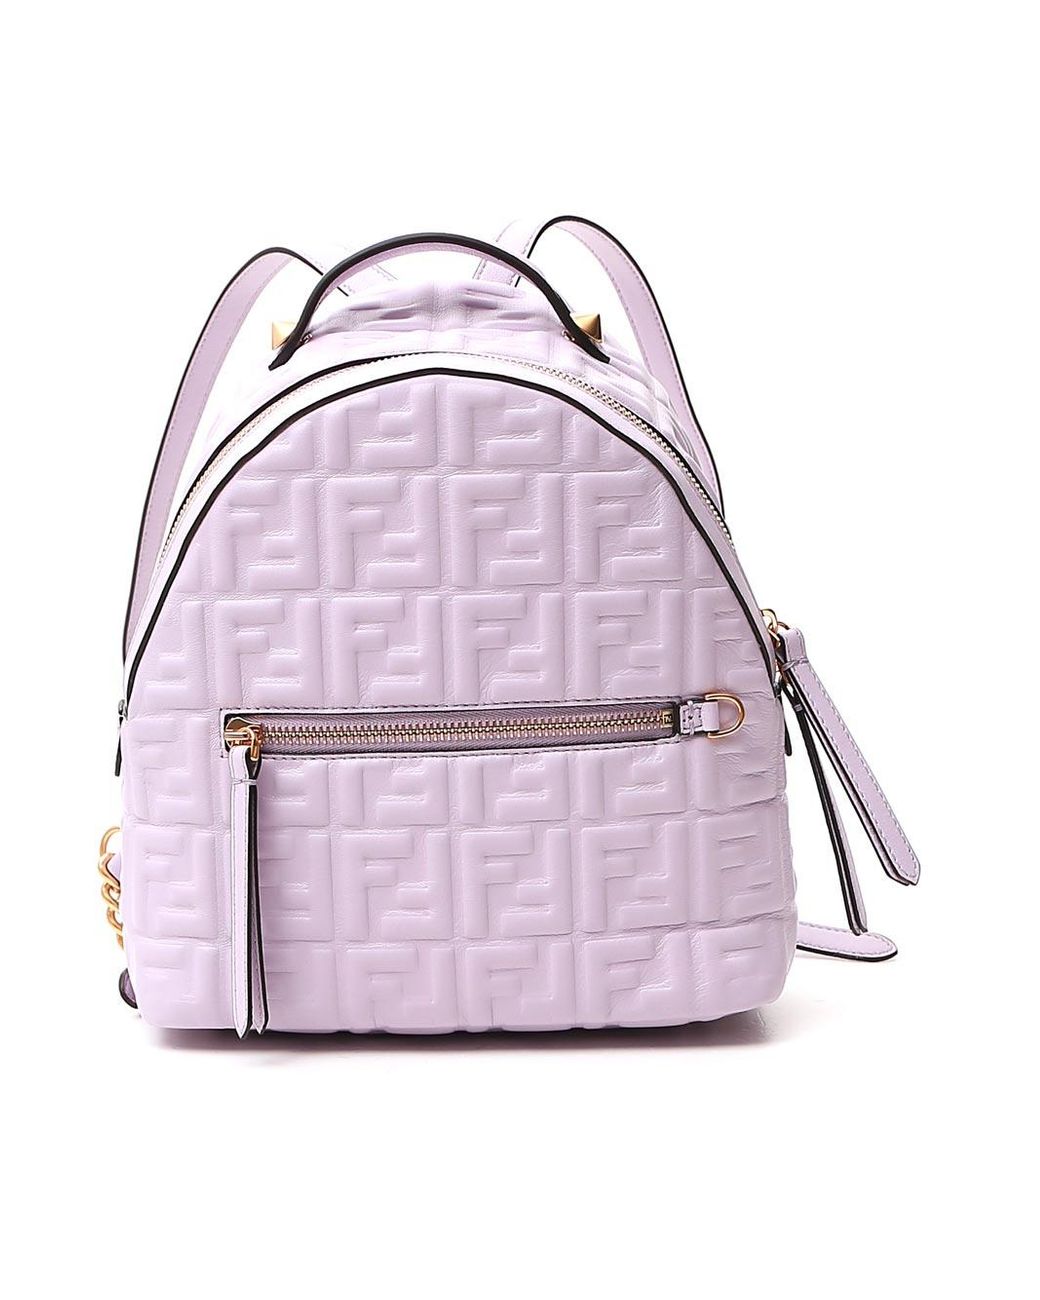 Fendi Leather Ff Logo Embossed Mini Backpack in Pink - Lyst